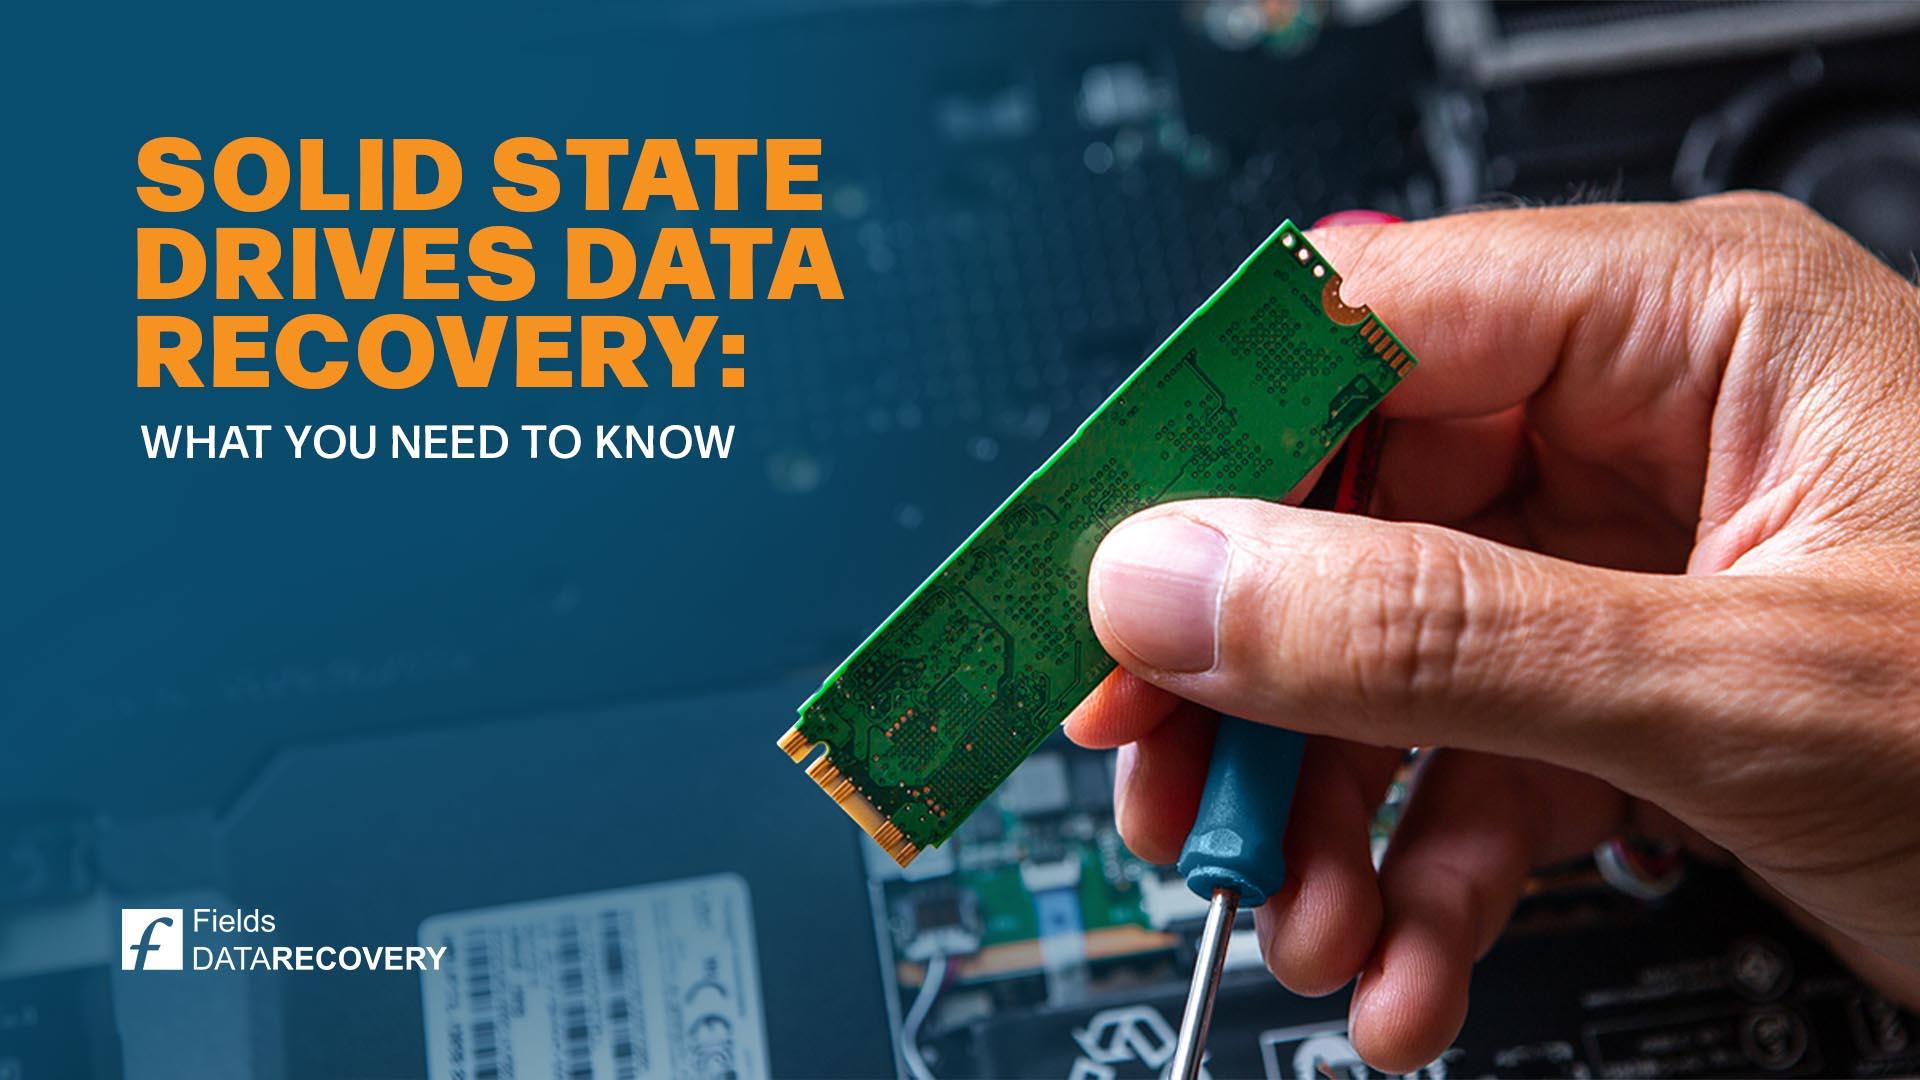 Solid State Drives (SSDs) Data Recovery: What You Need to Know